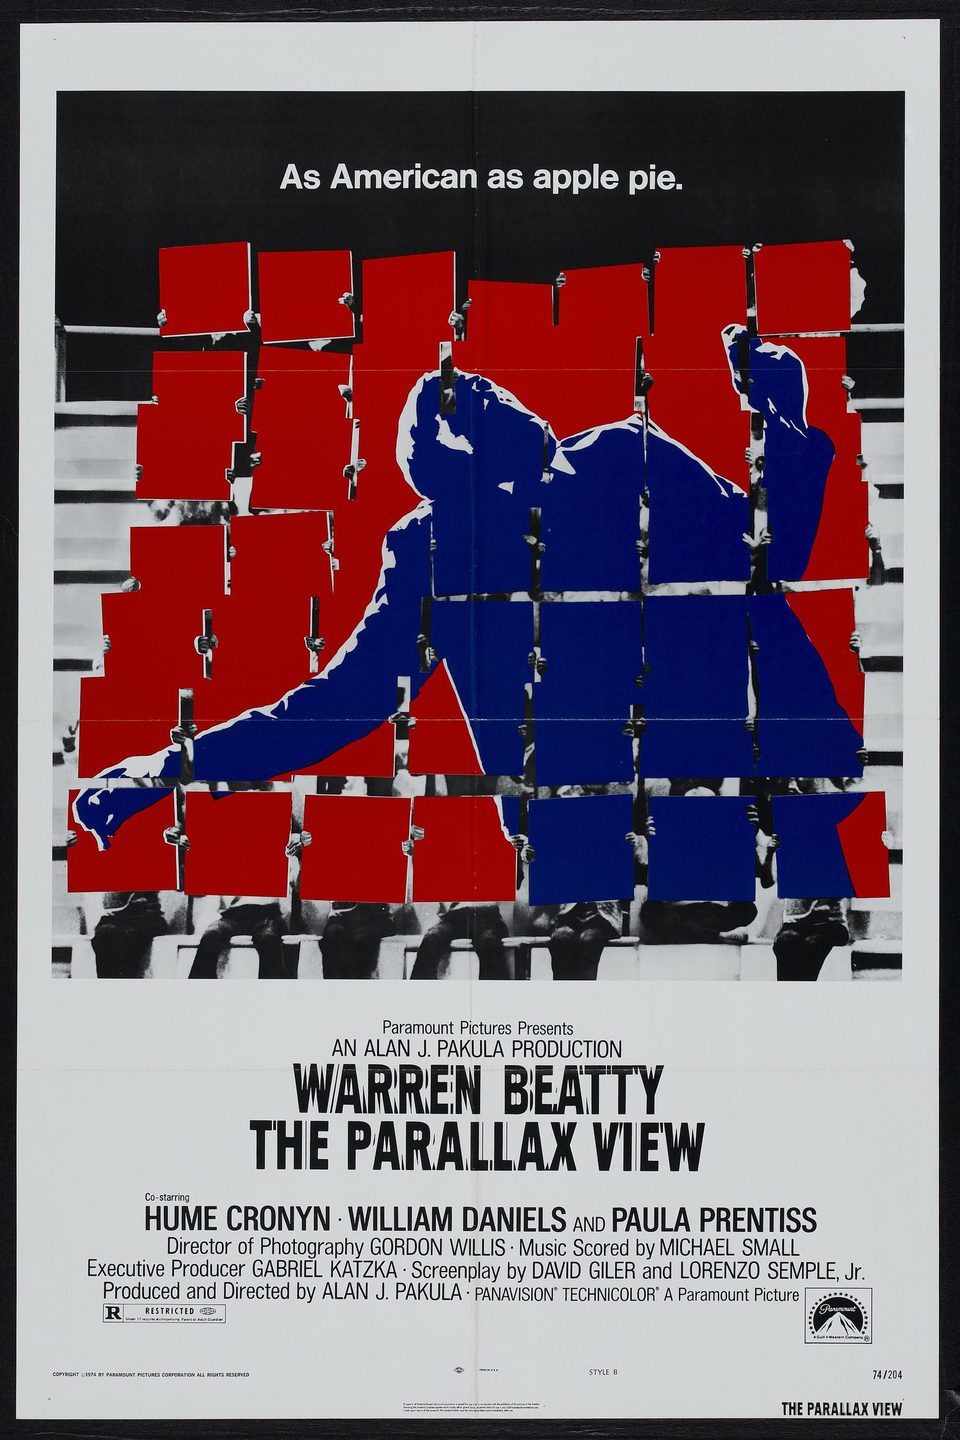 Poster of The Parallax View - EEUU